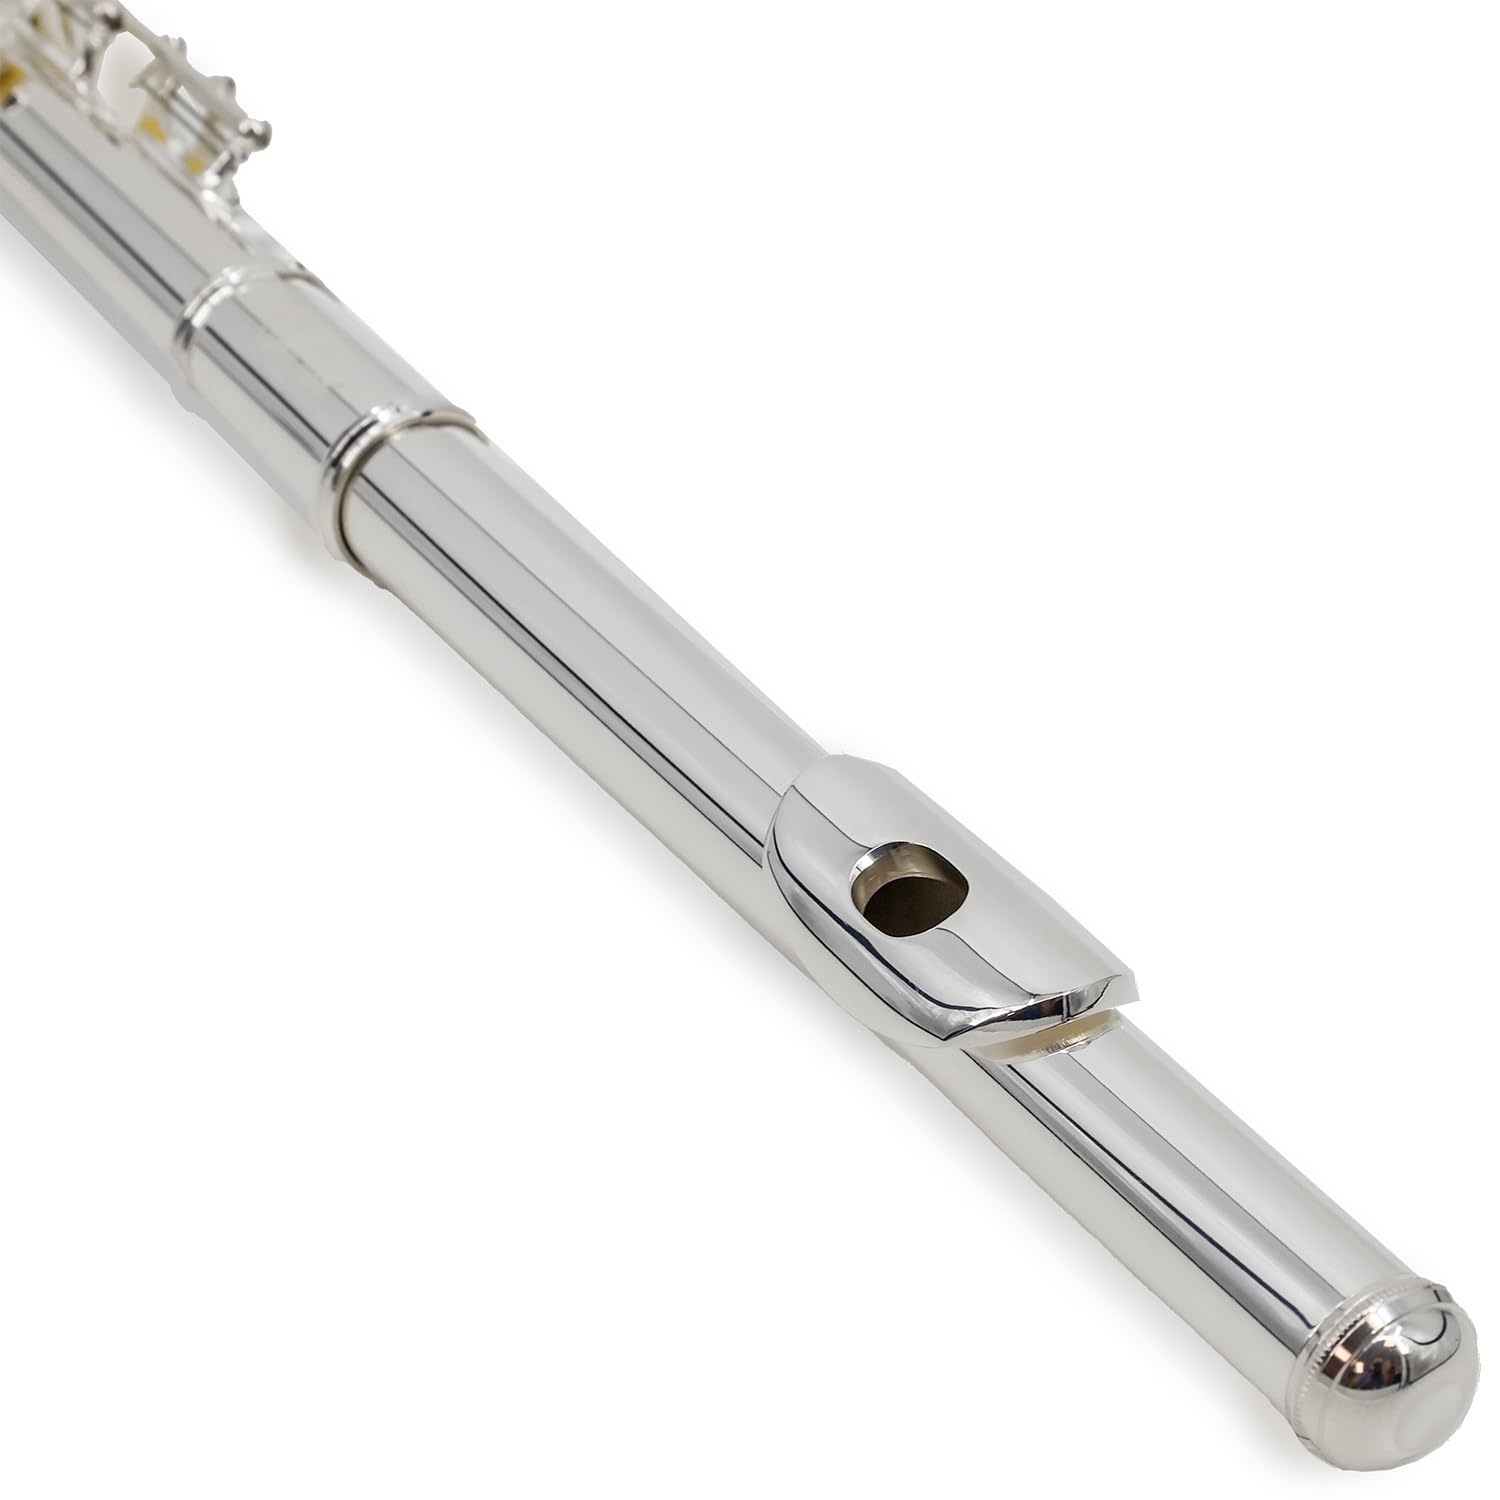 StarQuest SQ-FL250 Silver-Plated Closed-Hole C Flute - Premium Quality Instrument for Beginners and Experienced Musicians. Includes hard Protective Case